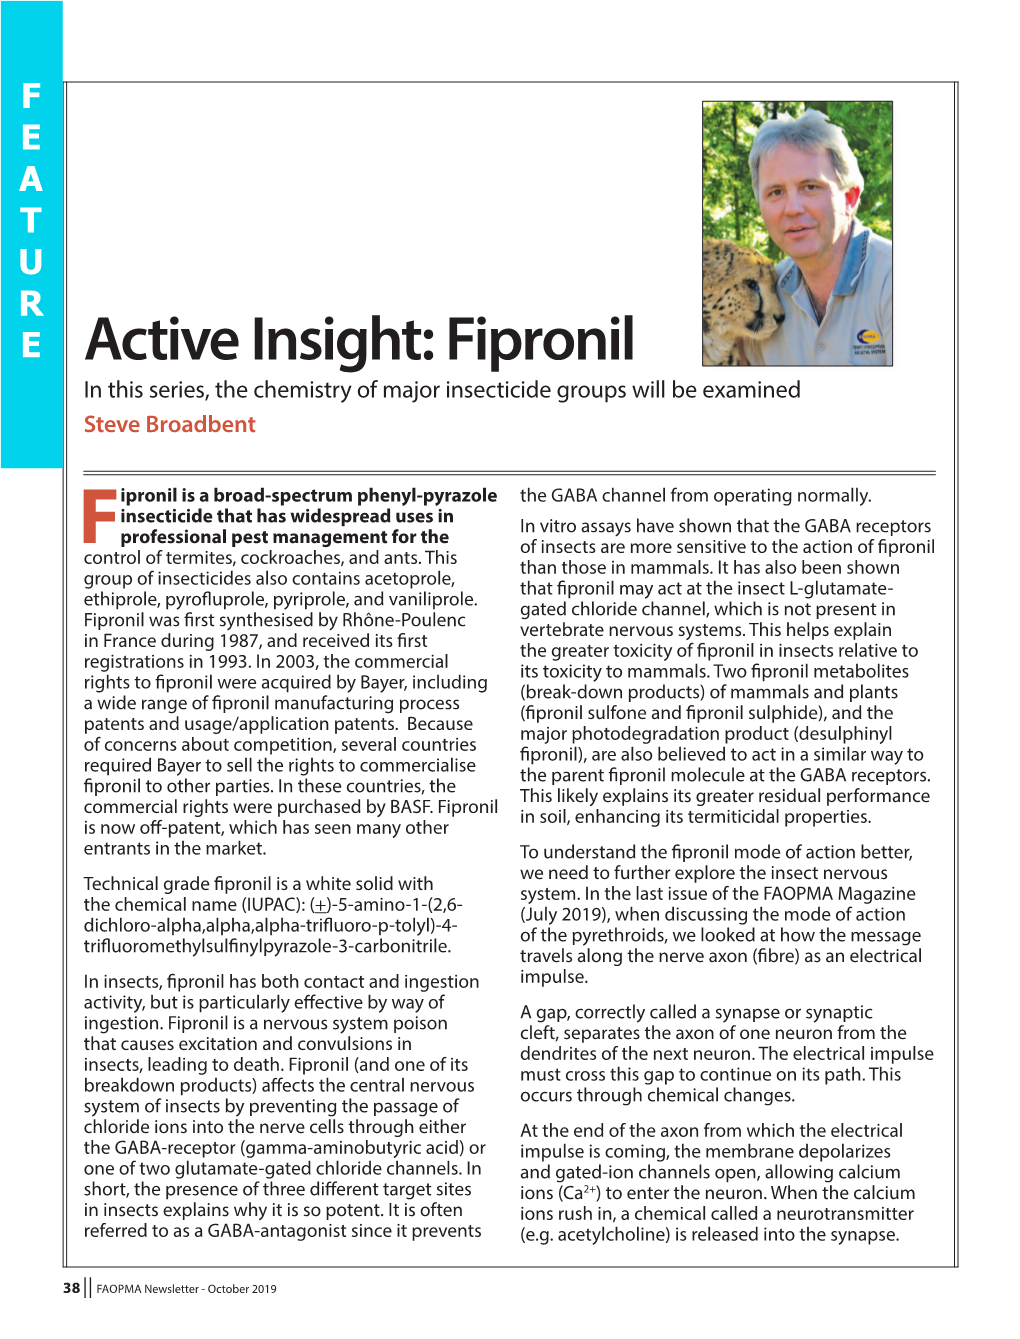 Active Insight: Fipronil in This Series, the Chemistry of Major Insecticide Groups Will Be Examined Steve Broadbent